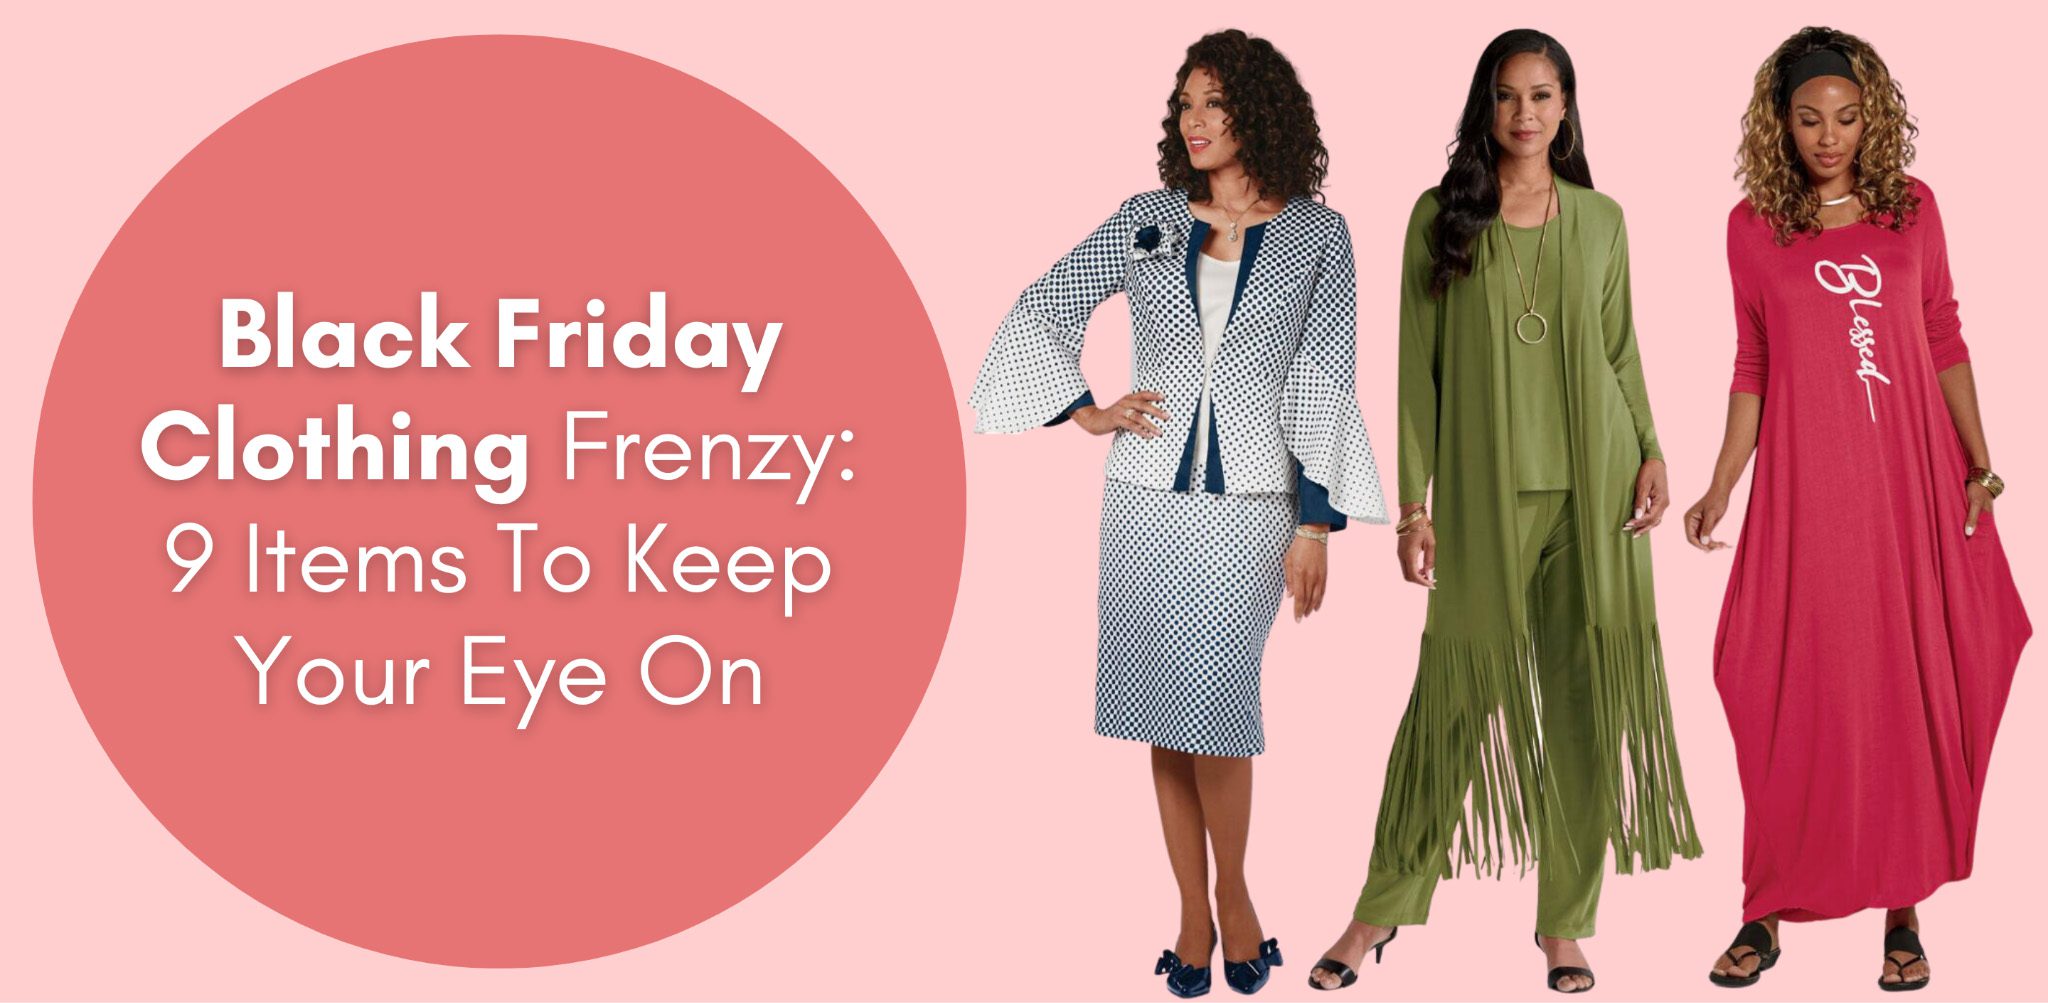 Black Friday Clothing Frenzy: 9 Items To Keep Your Eye On